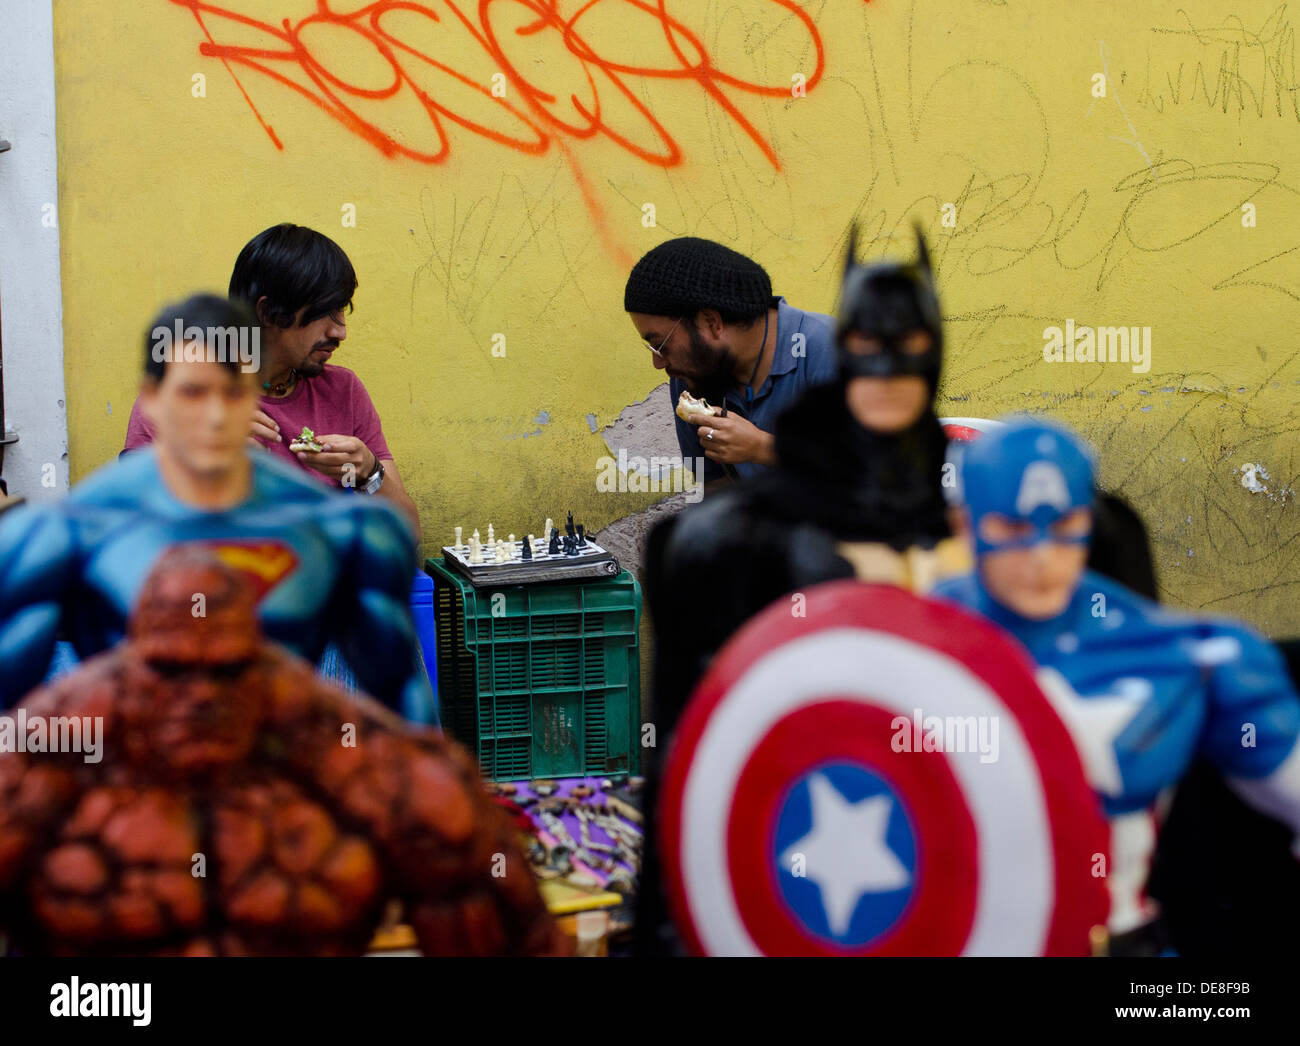 Two men eating snacks and playing chess whilst action superhero figures look on in the foreground. Stock Photo